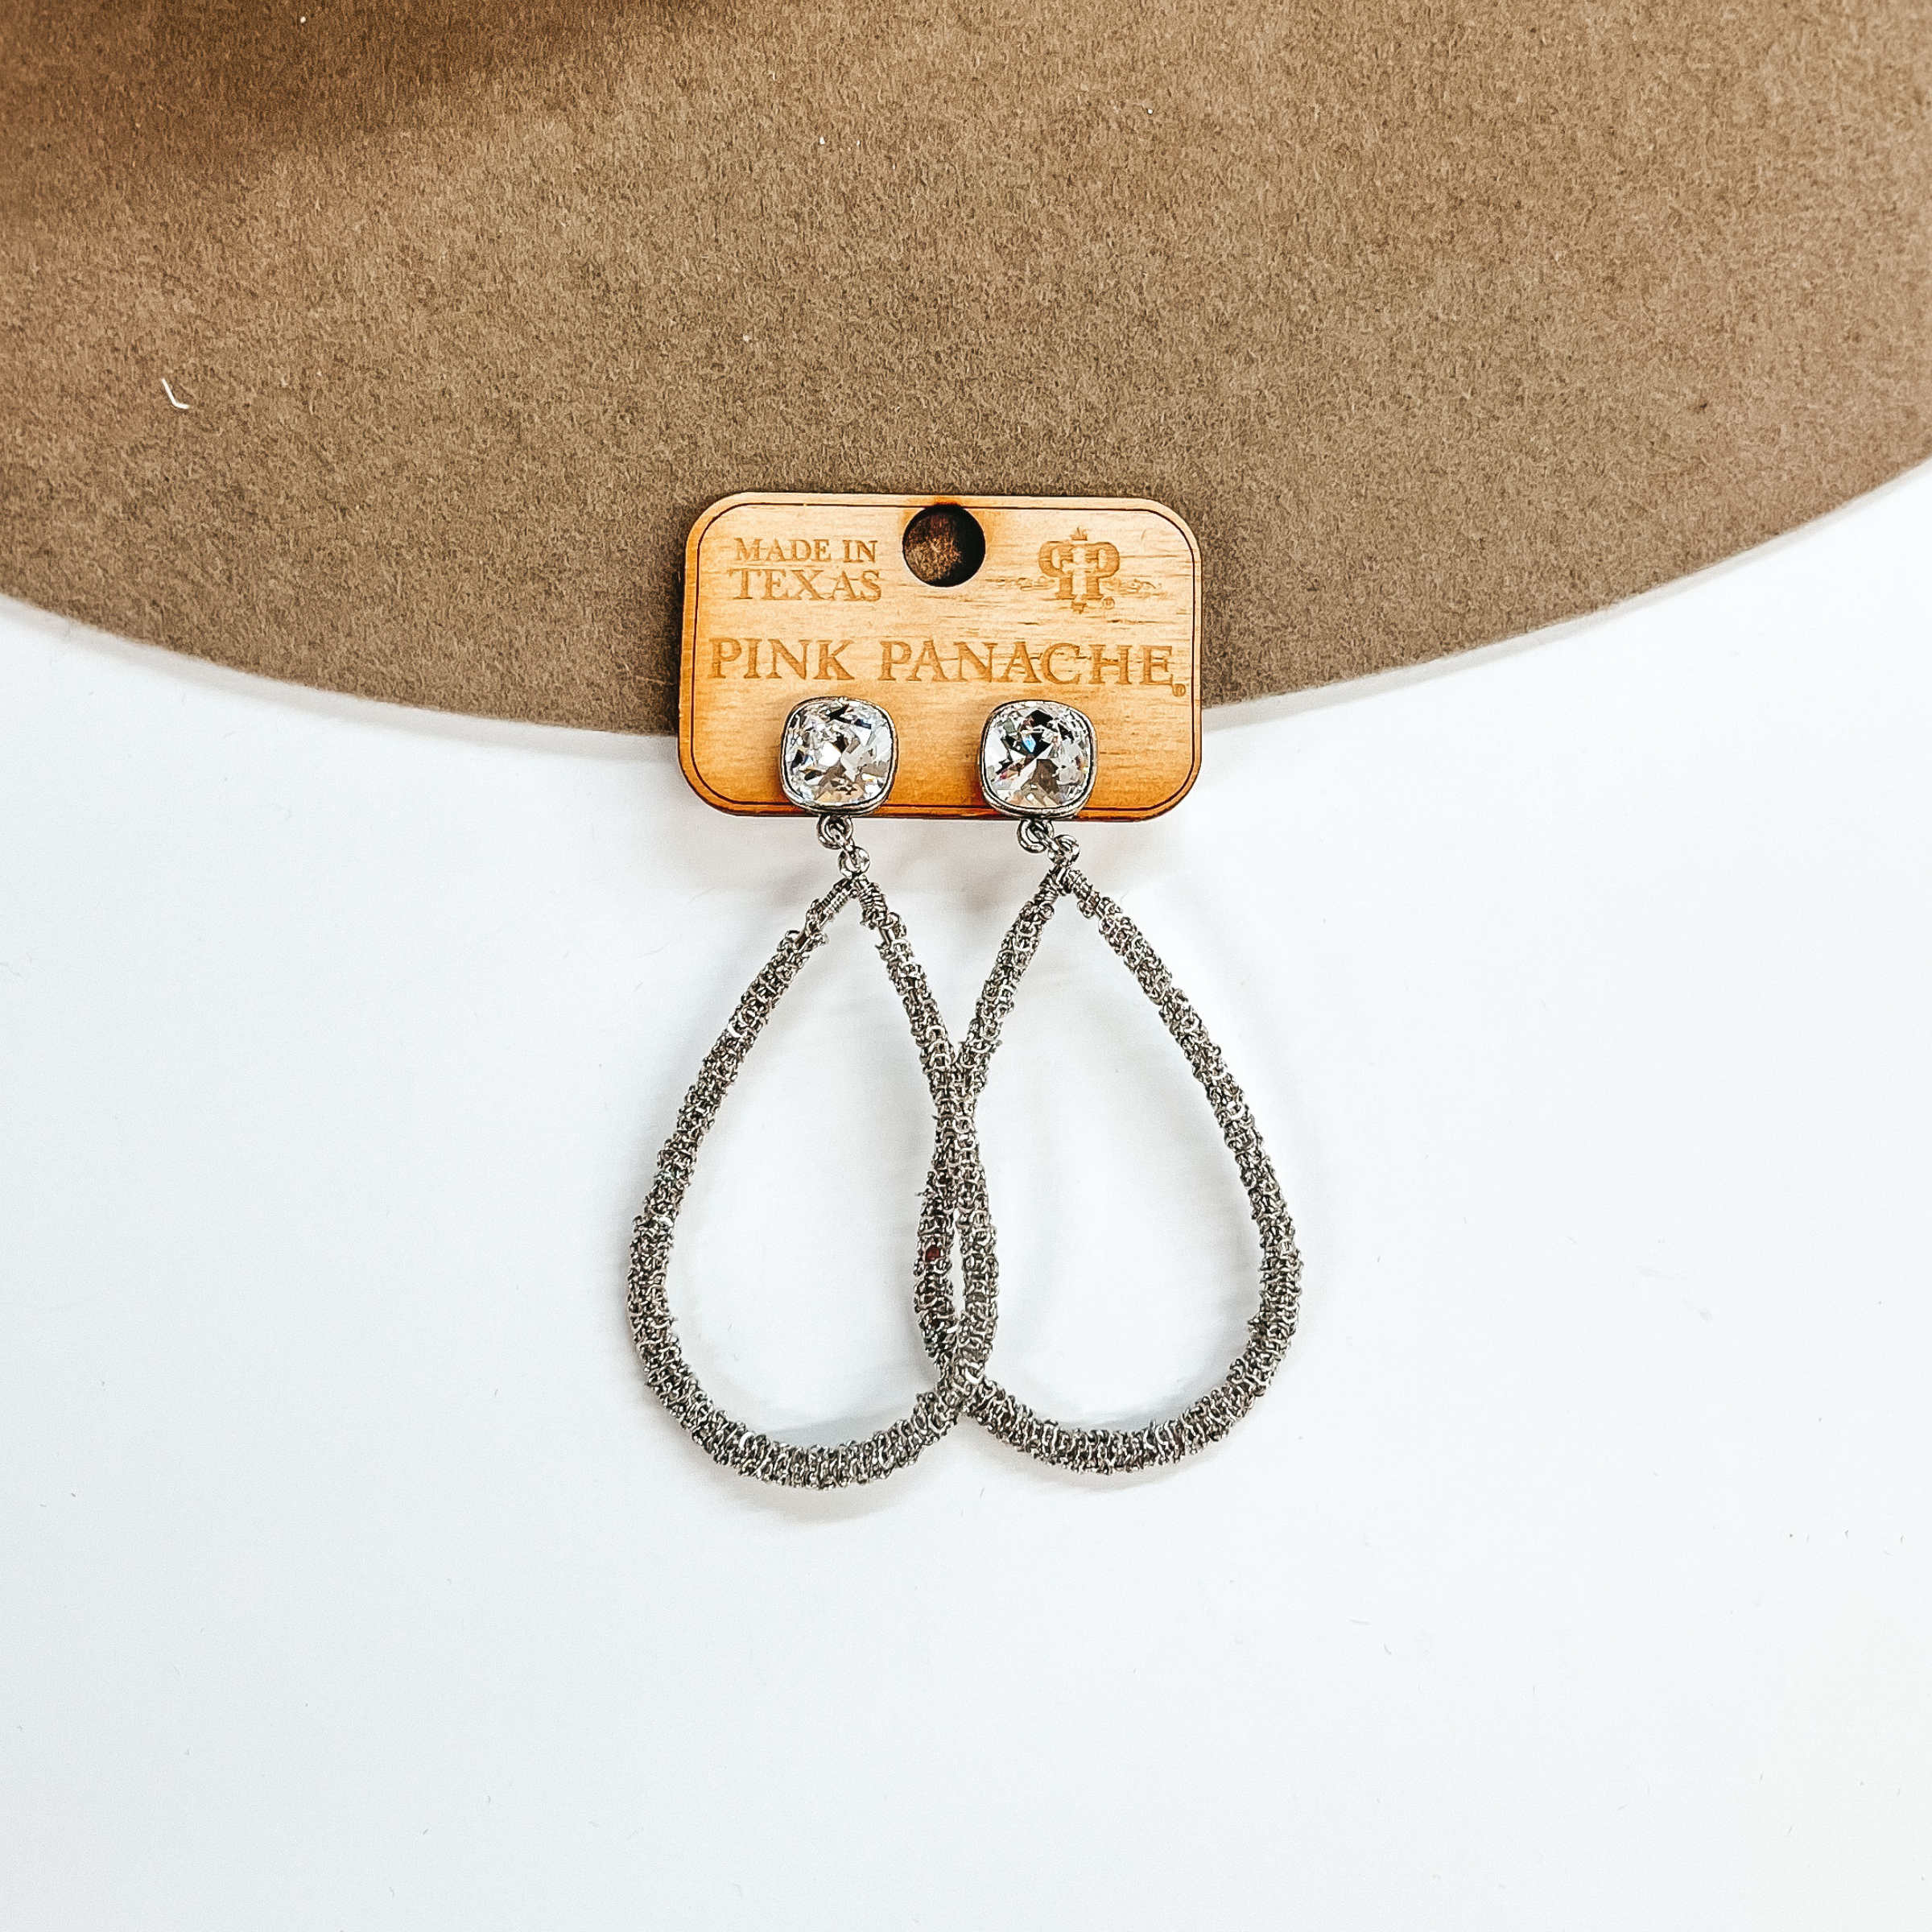 Silver teardrop earrings with a clear cushion cut crystal. Pictured on white background with a beige hat.